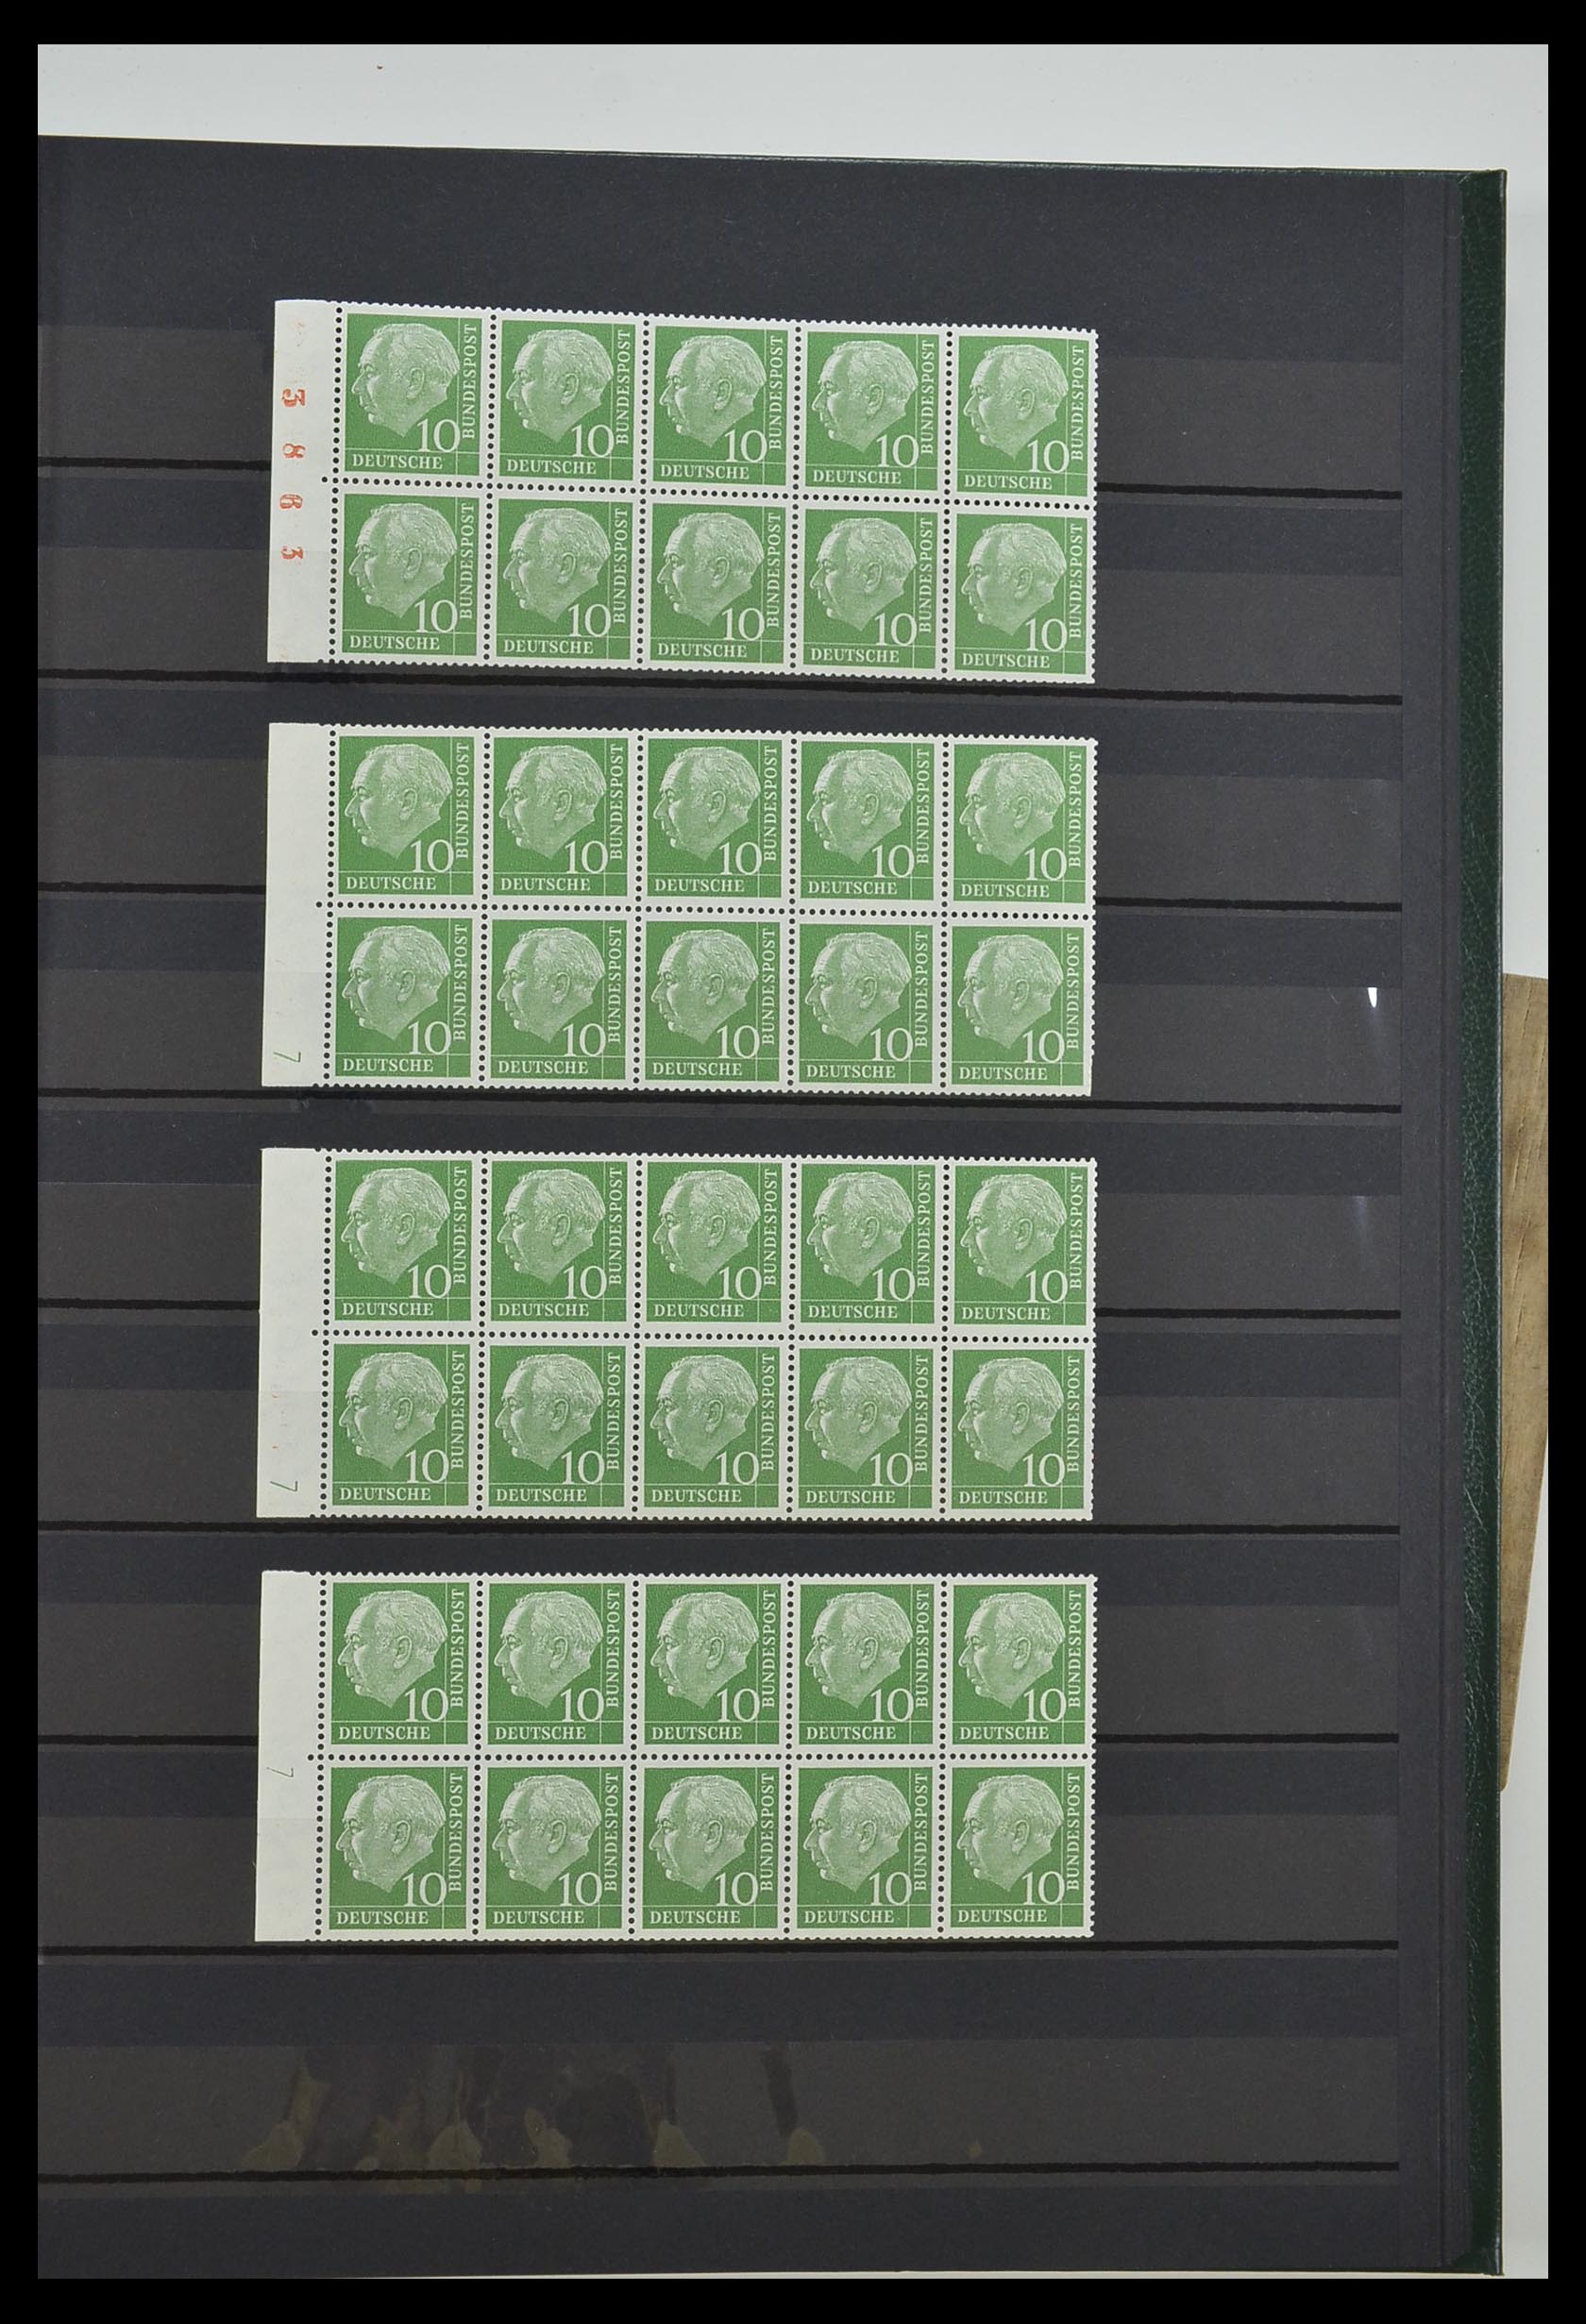 33275 041 - Stamp collection 33275 Bundespost combinations 1951-1960.